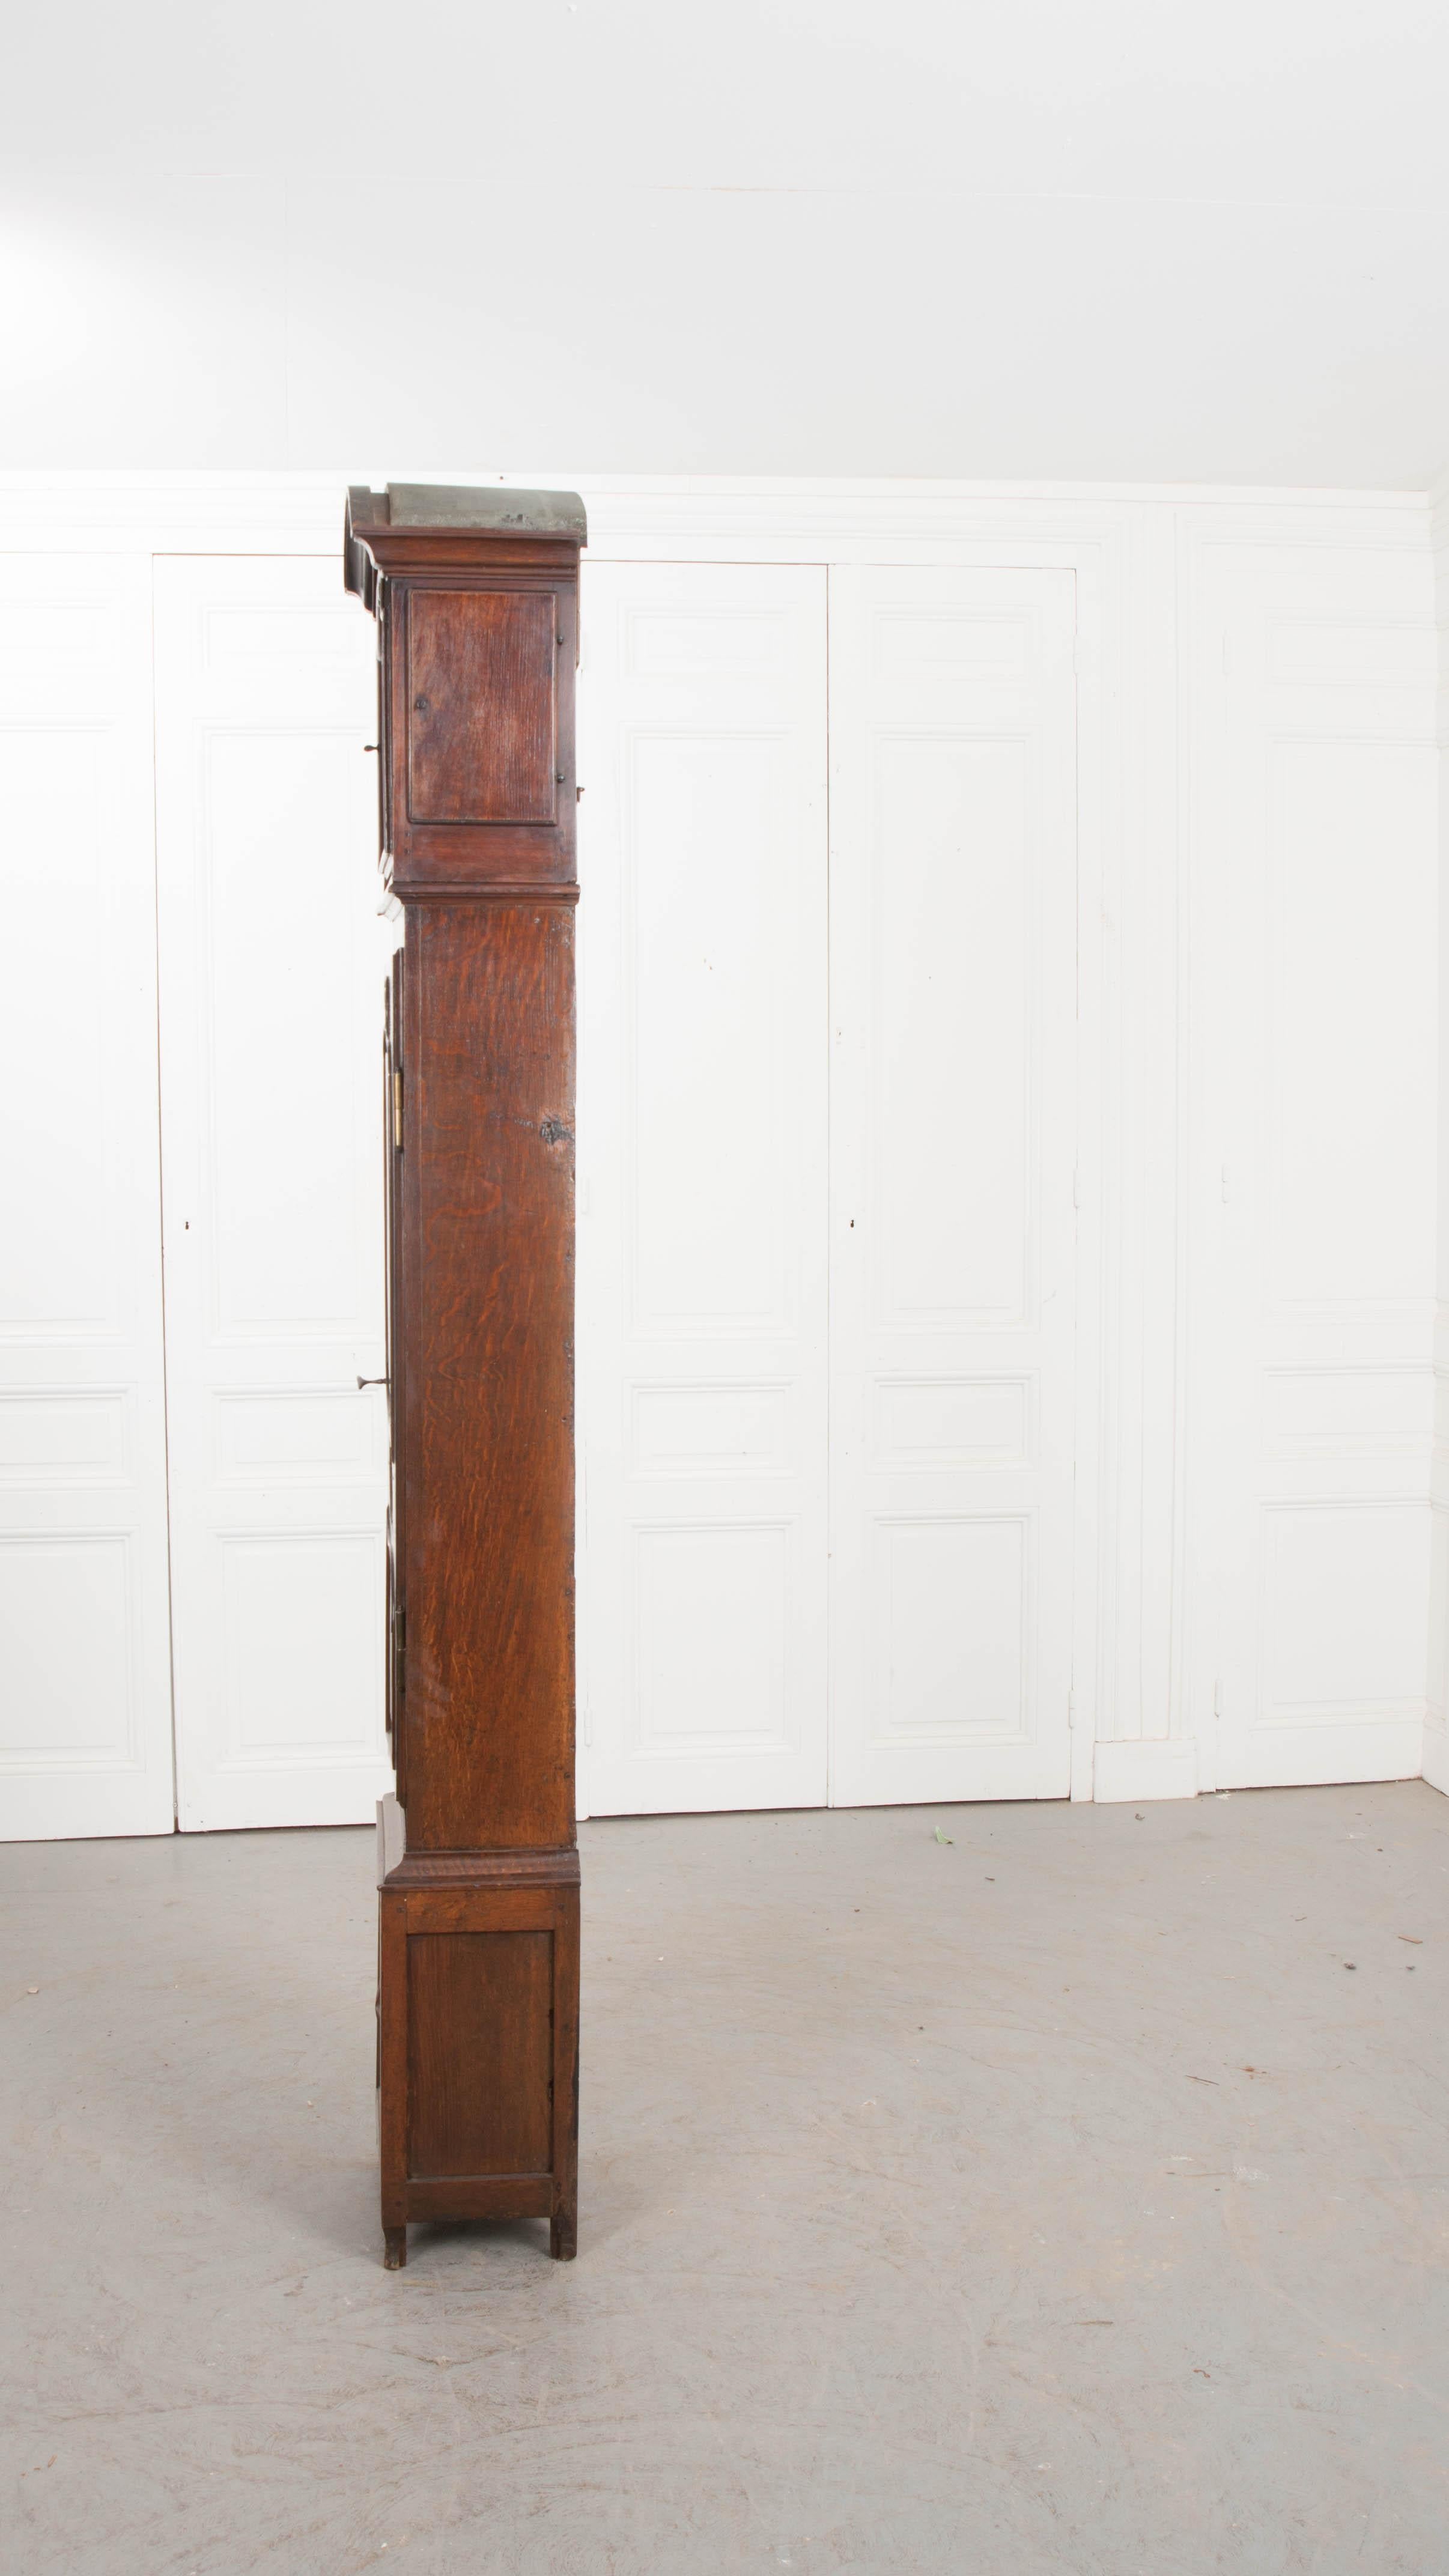 French Provincial Belgian Provincial Late 18th-Early 19th Century Oak Tall Case Clock